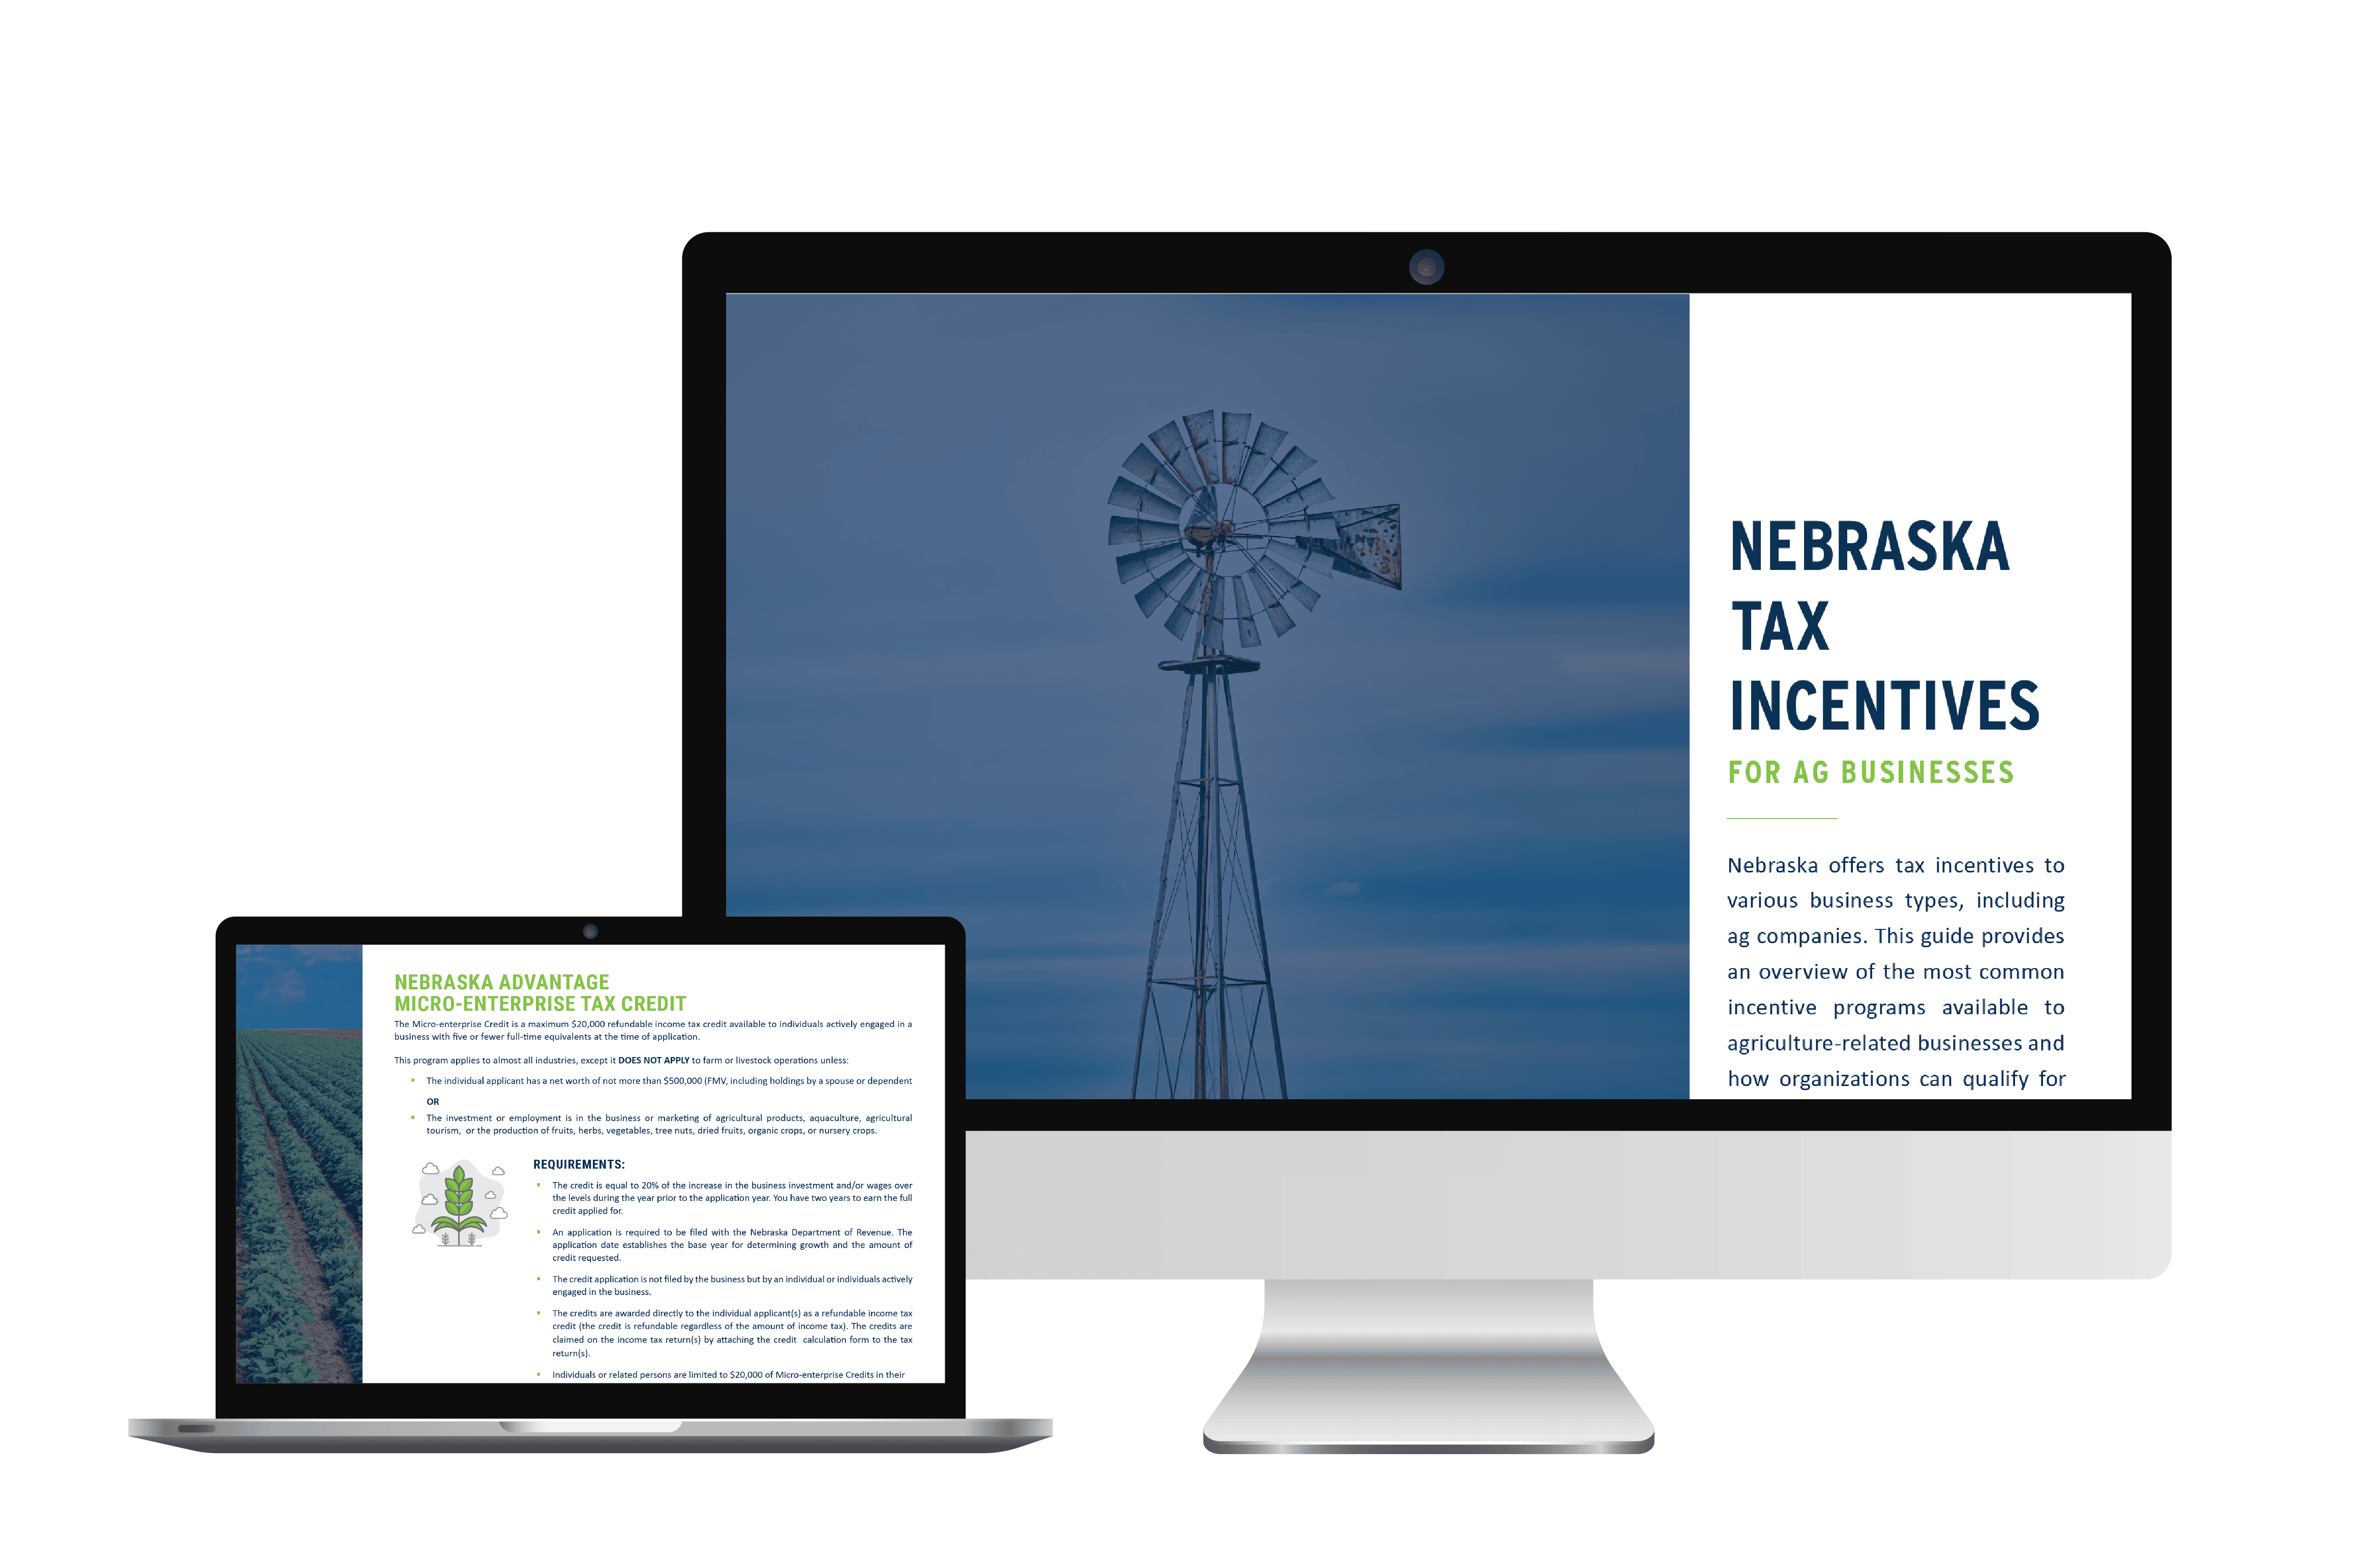 Nebraska Tax Incentives for Ag-Related Businesses